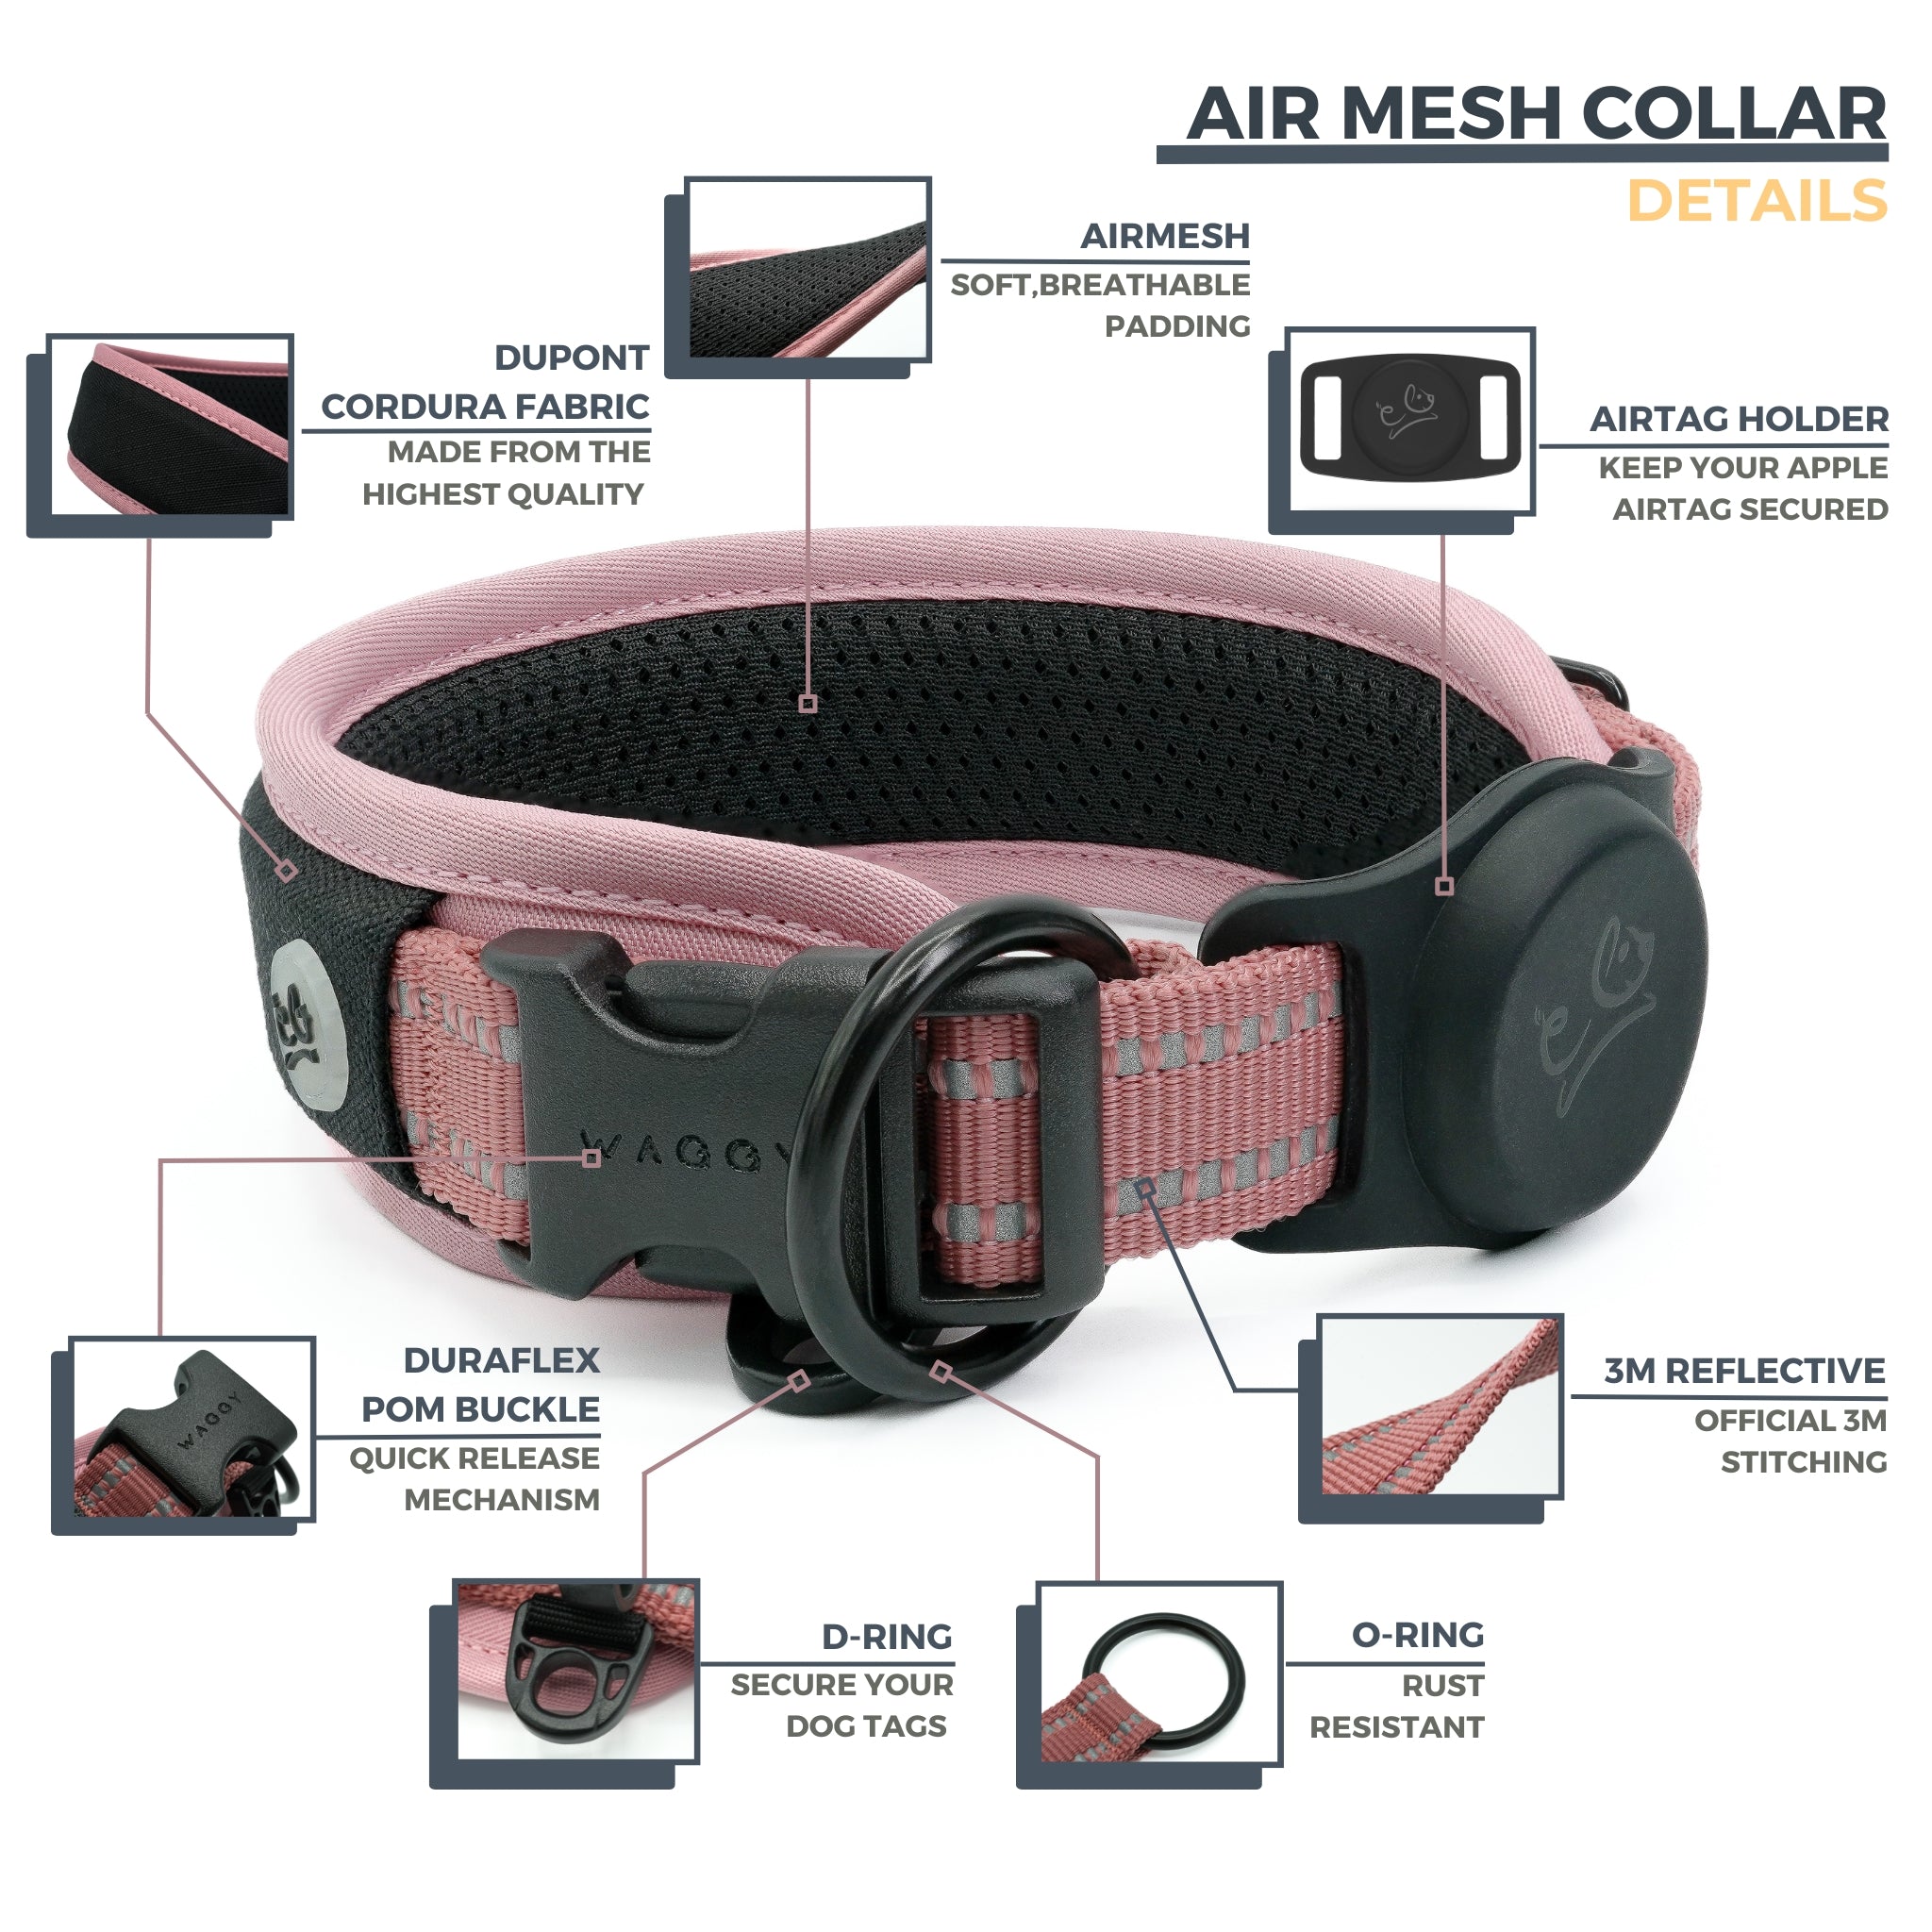 7 features &amp; details regarding Pink Air Mesh dog collar. Dupont Cordura Fabric; Air Mesh padding; Airtag Holder; Duraflex buckle; D-ring; O-ring; 3M Reflective stitching with short description and close up images.